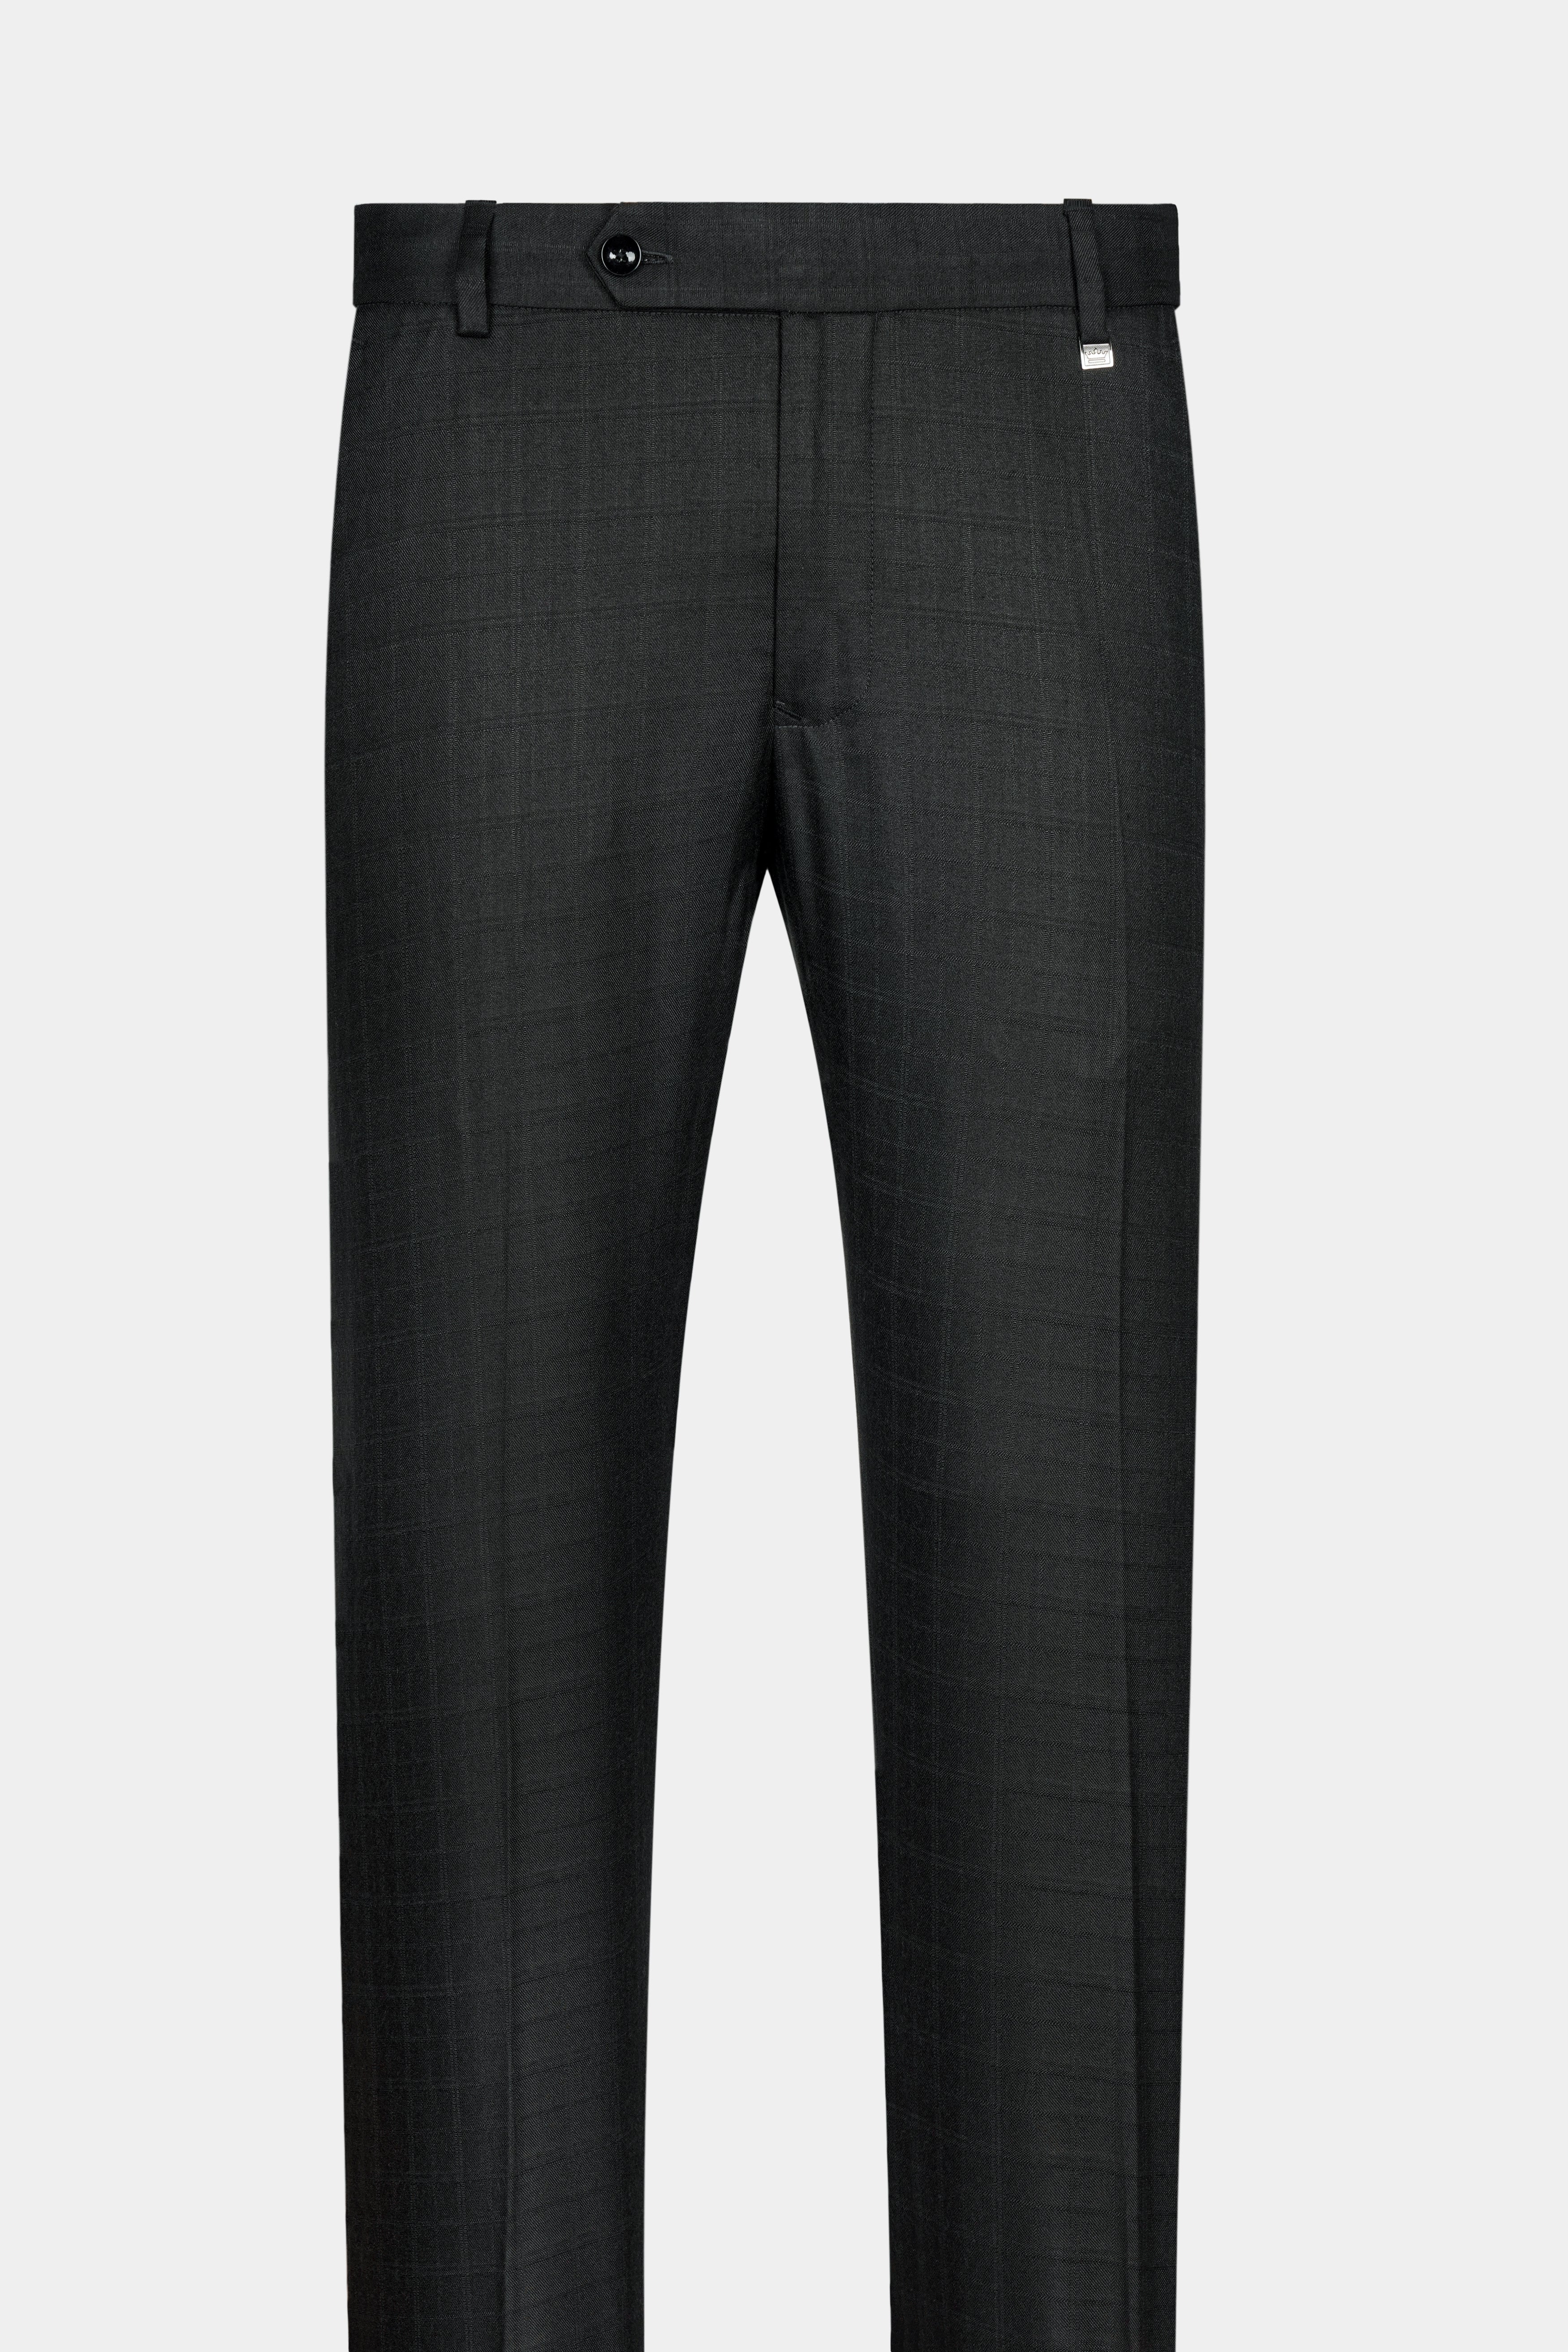 Abbey Gray Subtle Checkered Wool Rich Suit ST3053-SB-36, ST3053-SB-38, ST3053-SB-40, ST3053-SB-42, ST3053-SB-44, ST3053-SB-46, ST3053-SB-48, ST3053-SB-50, ST3053-SB-52, ST3053-SB-54, ST3053-SB-56, ST3053-SB-58, ST3053-SB-60